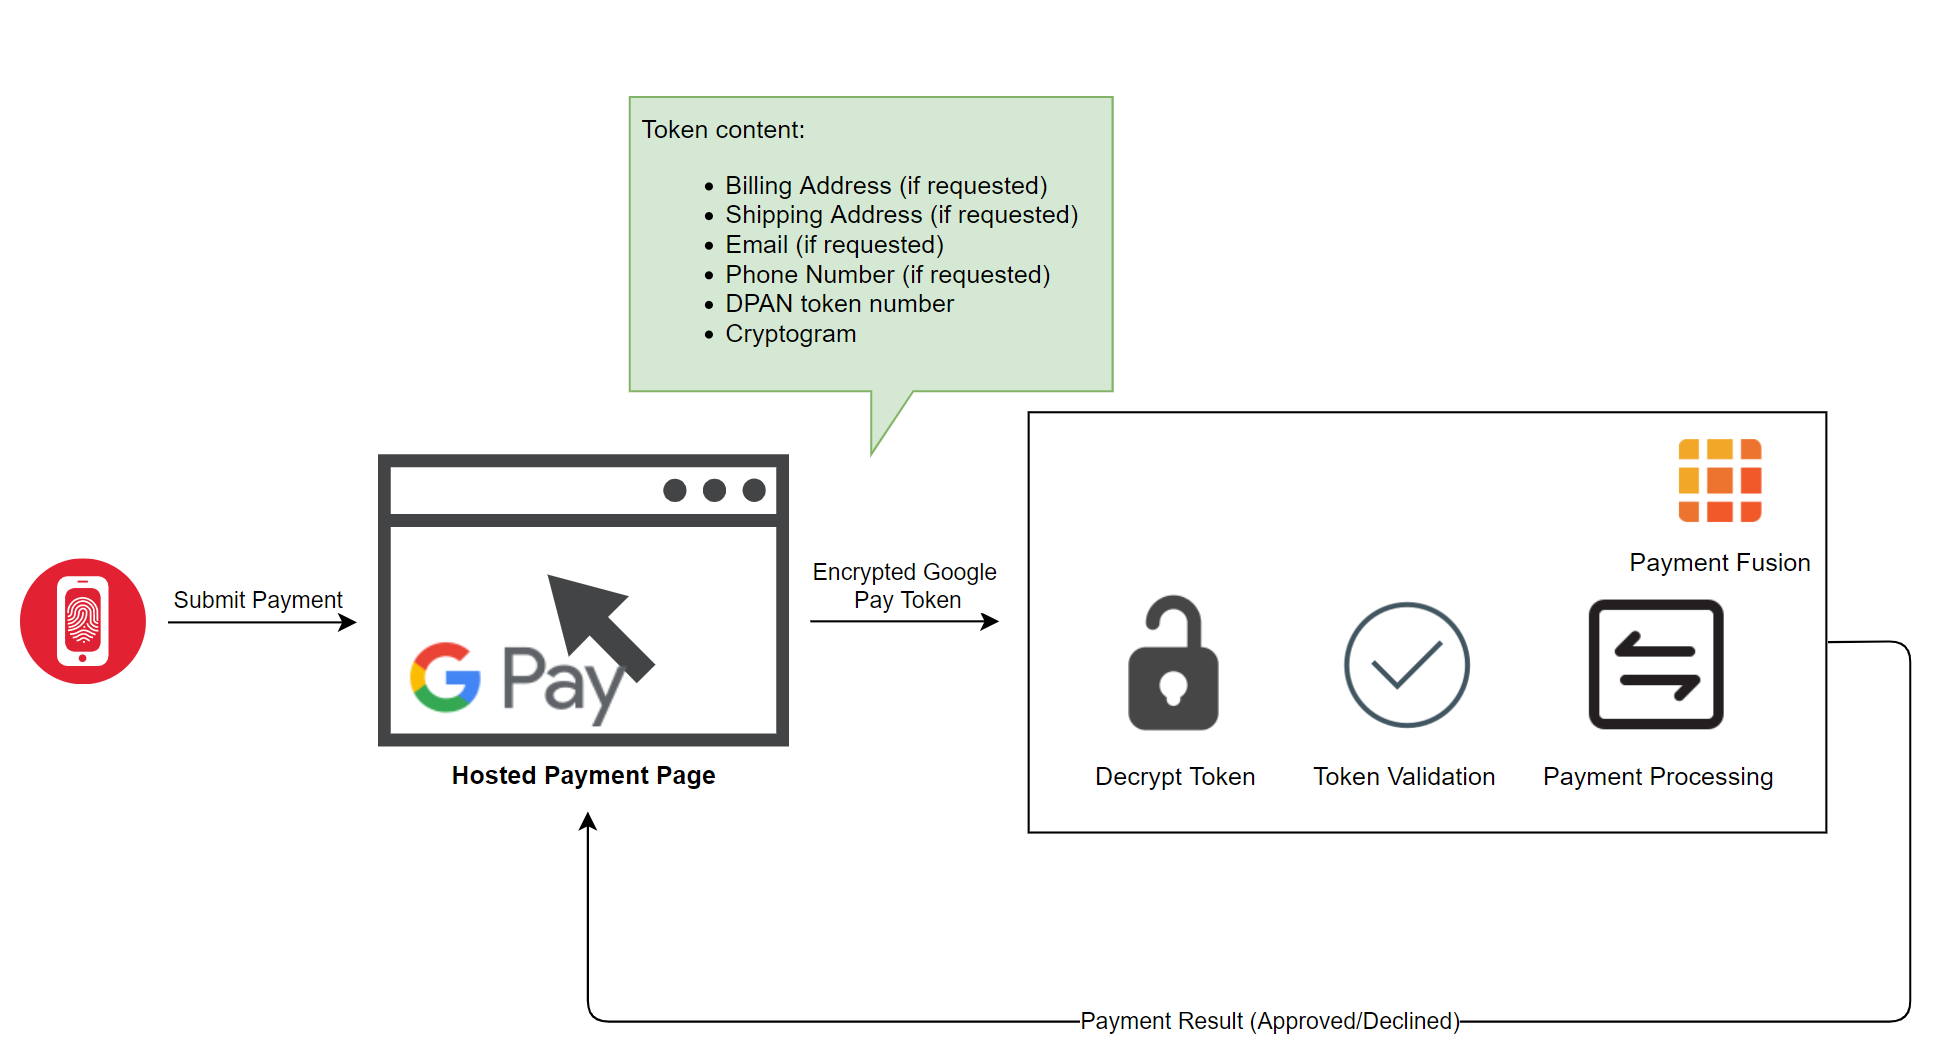 Diagram of Google Pay service to complete online transactions via Google Wallet on supported devices.